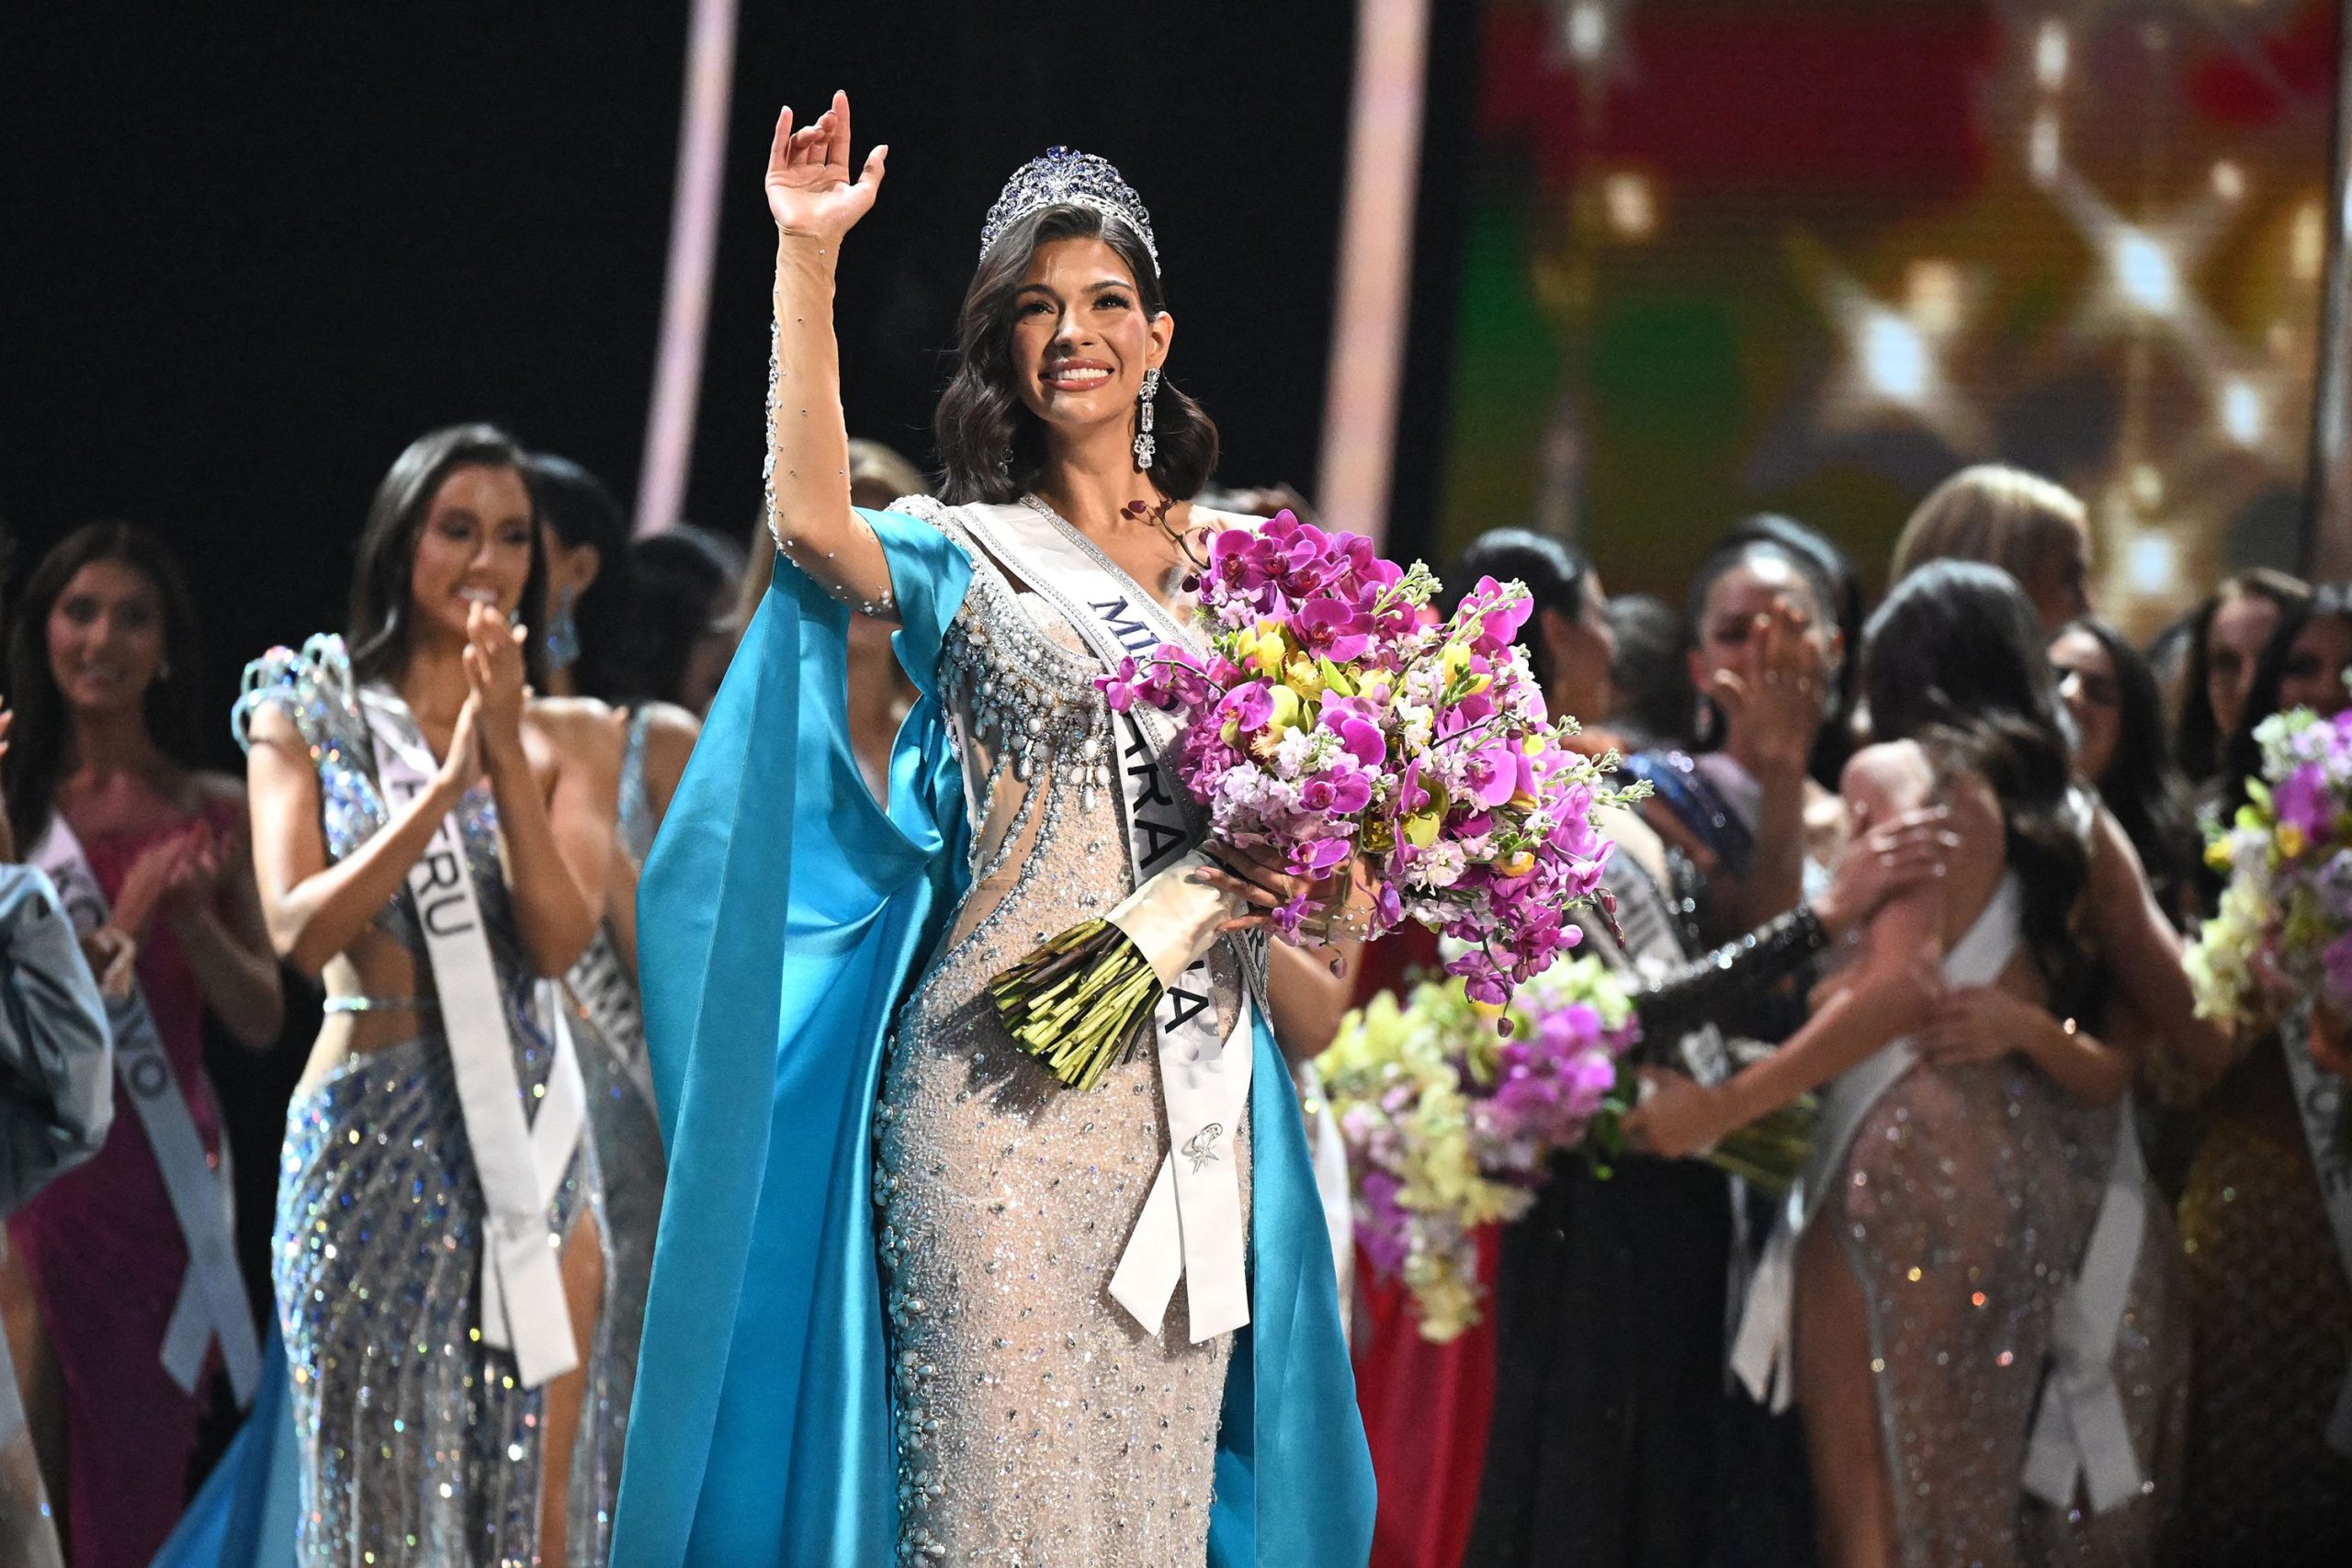 Miss Nicaragua wins 2023 Miss Universe pageant